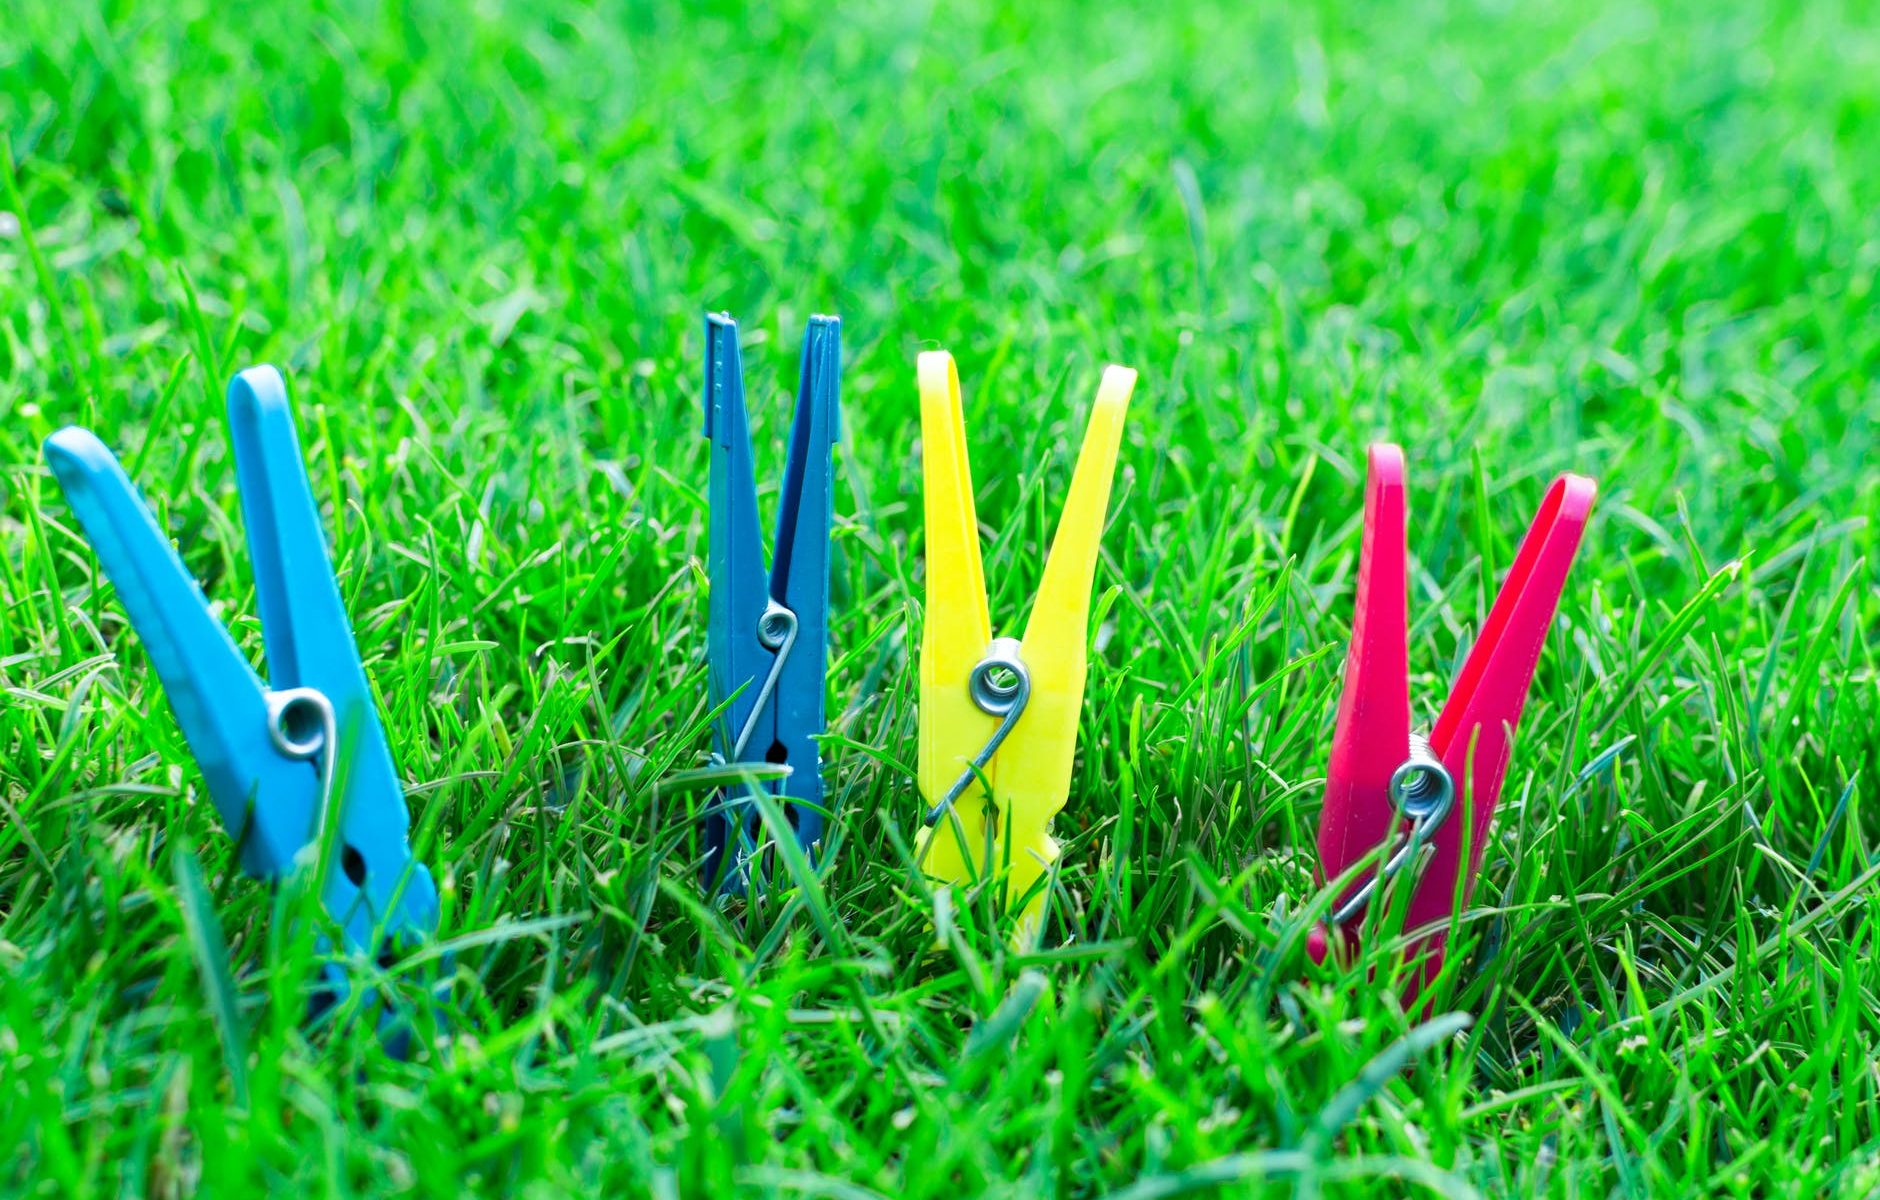 two blue one yellow and one pink clothes clips on green grass